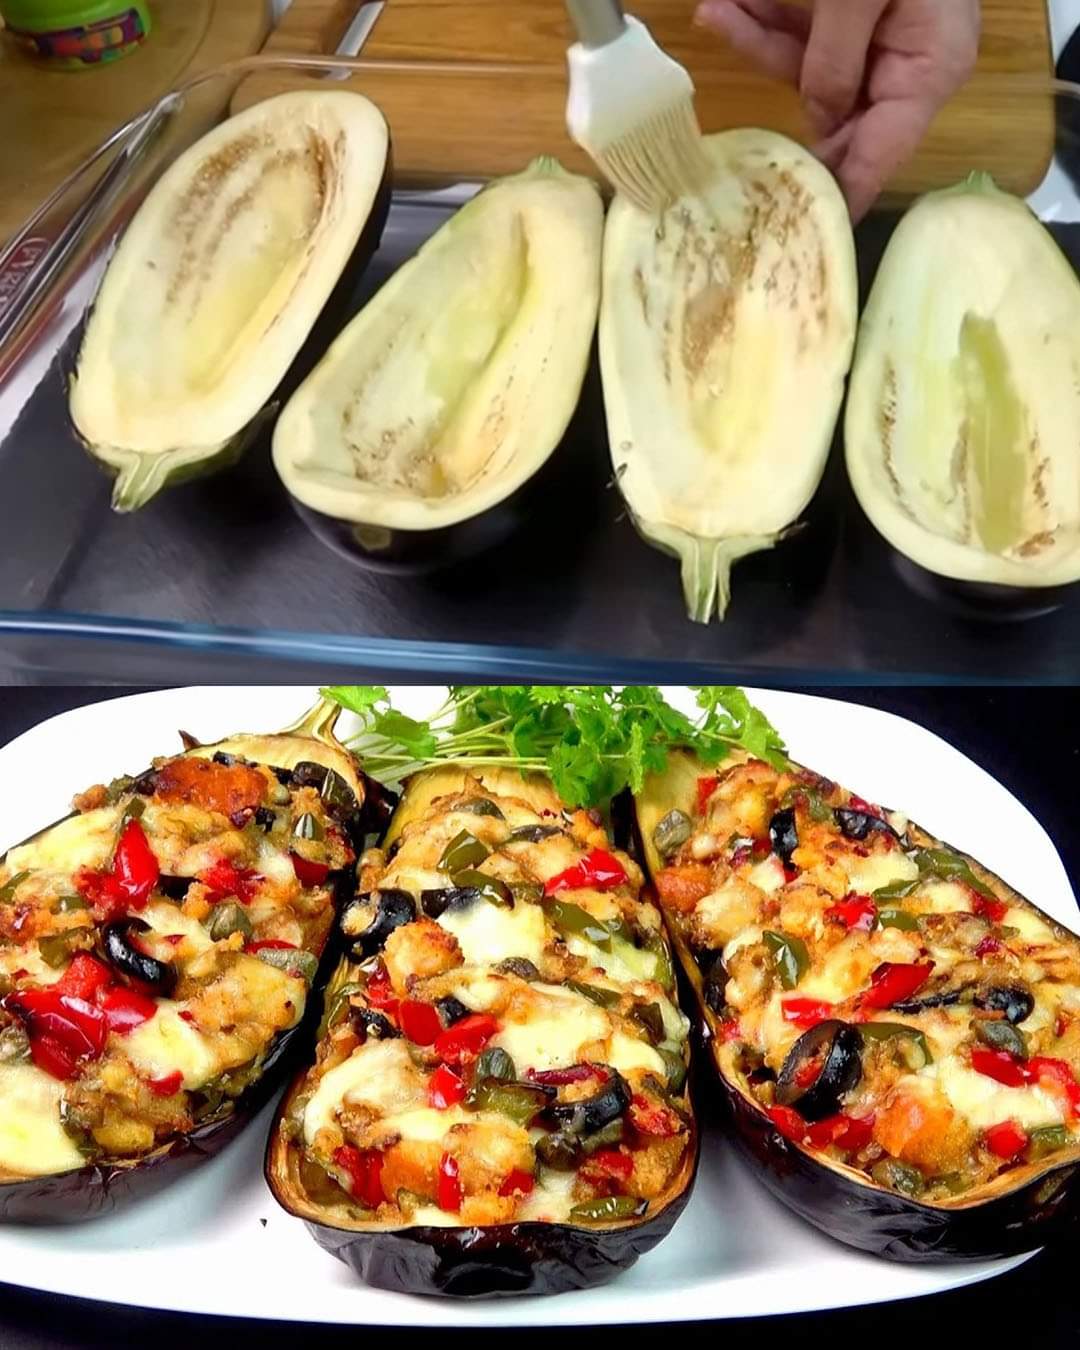 Aubergine Delight: A Dish That Rivals Meat